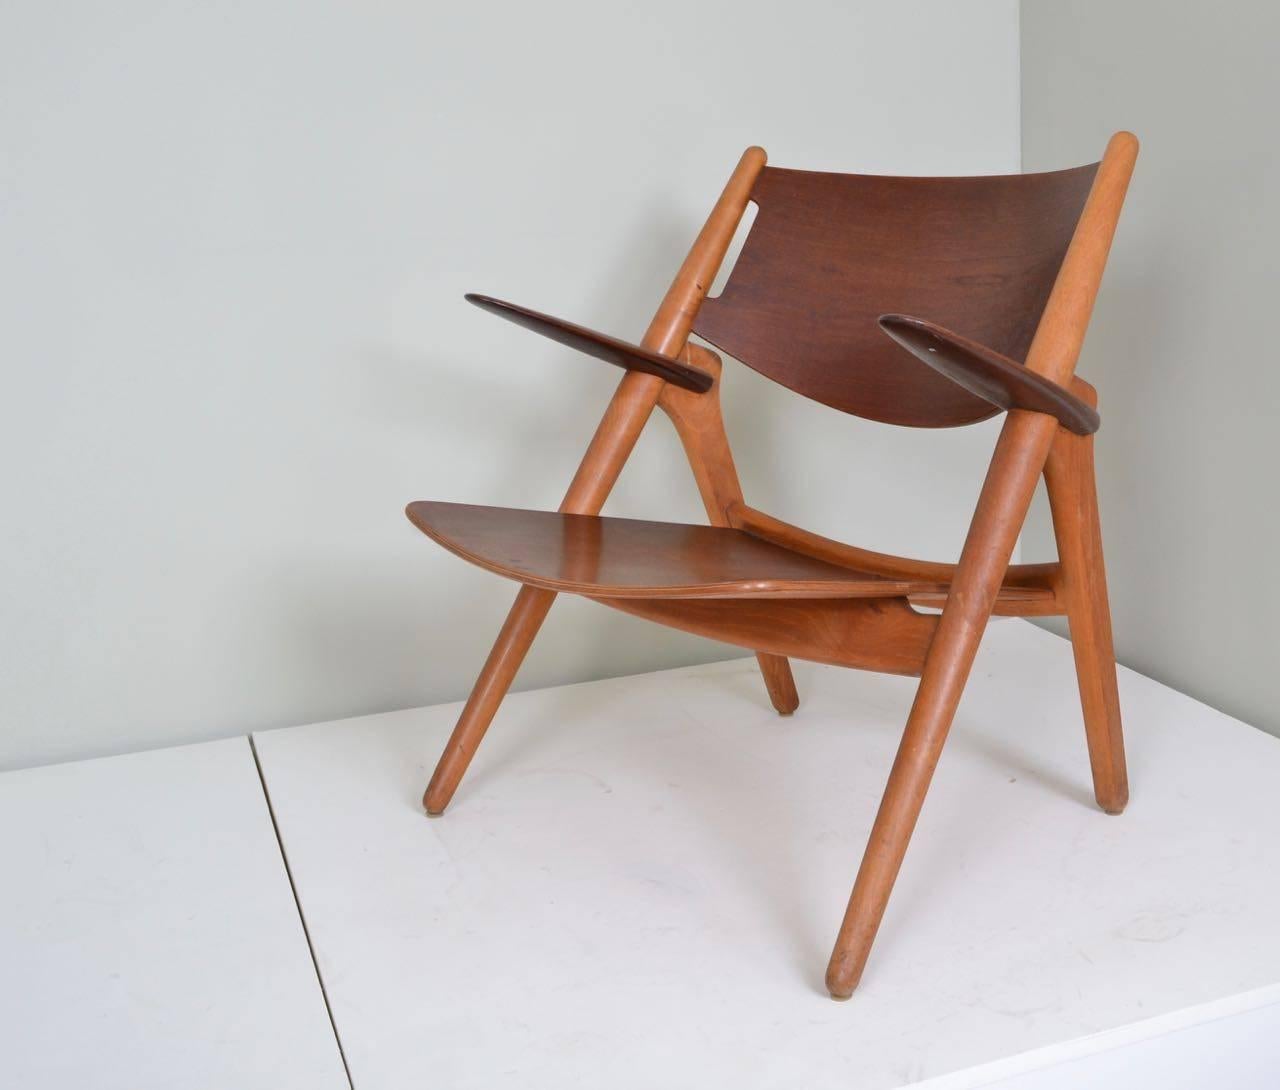 This is the early version of the CH-28 Sawbuck chair.
Designed by Hans J Wegner and manufactured by
Carl Hansen.